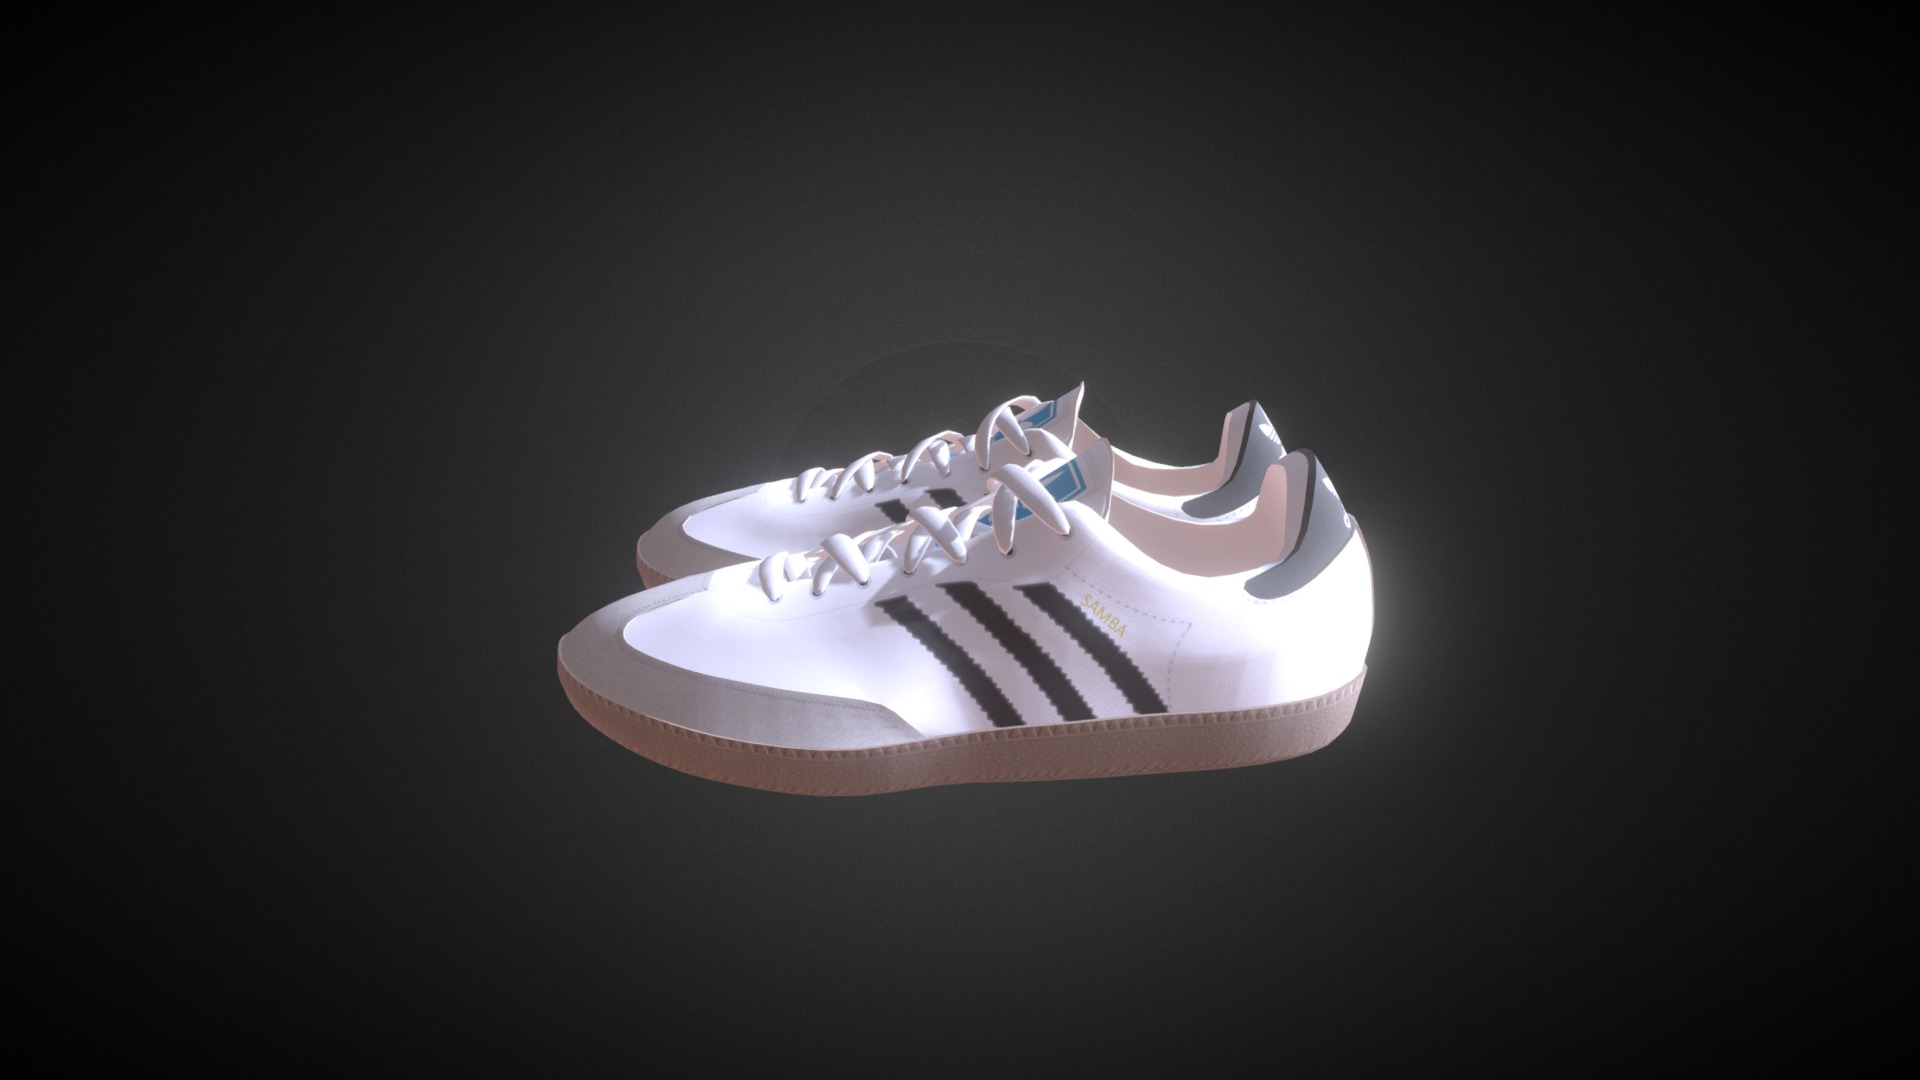 3D model Adidas Samba - This is a 3D model of the Adidas Samba. The 3D model is about a white and black shoe.